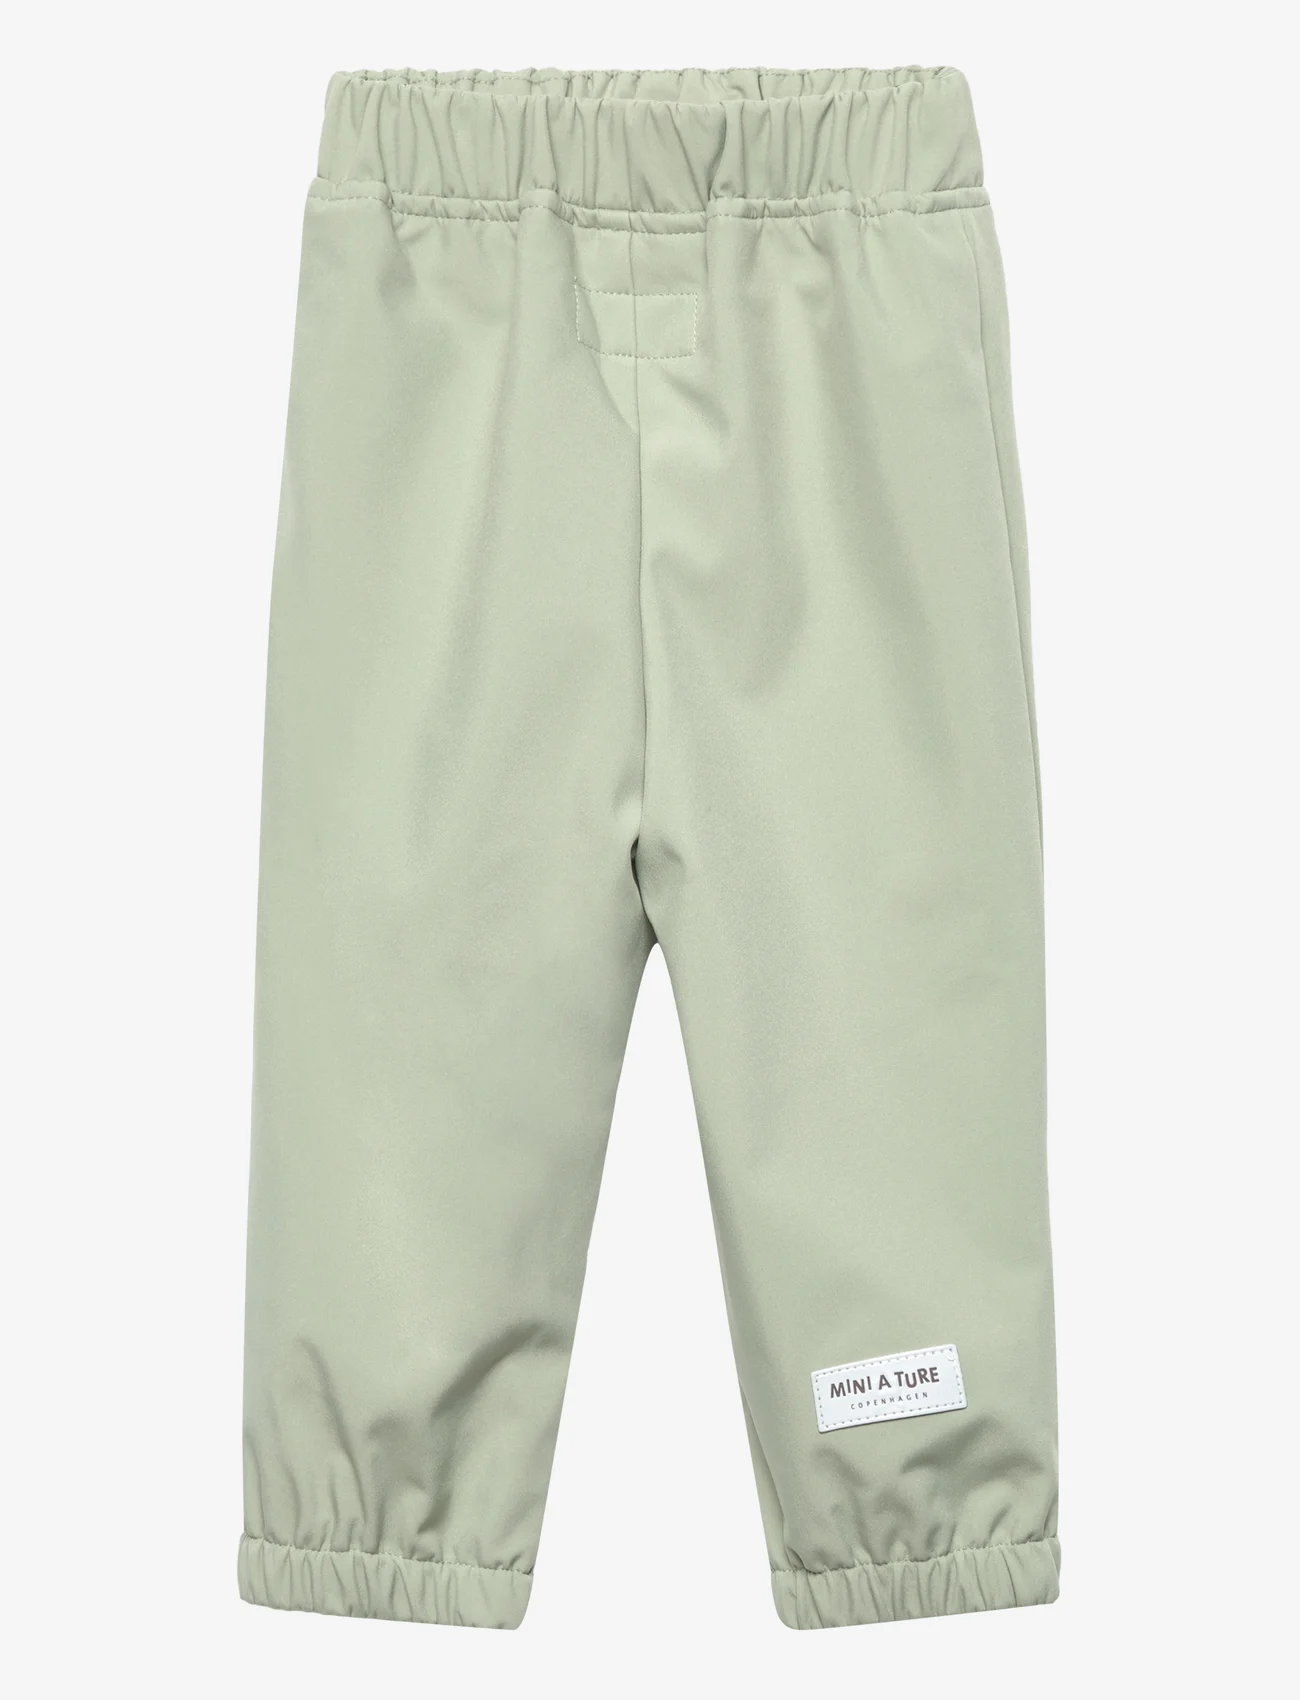 Mini A Ture - Aian spring softshell pants - seagrass - 1